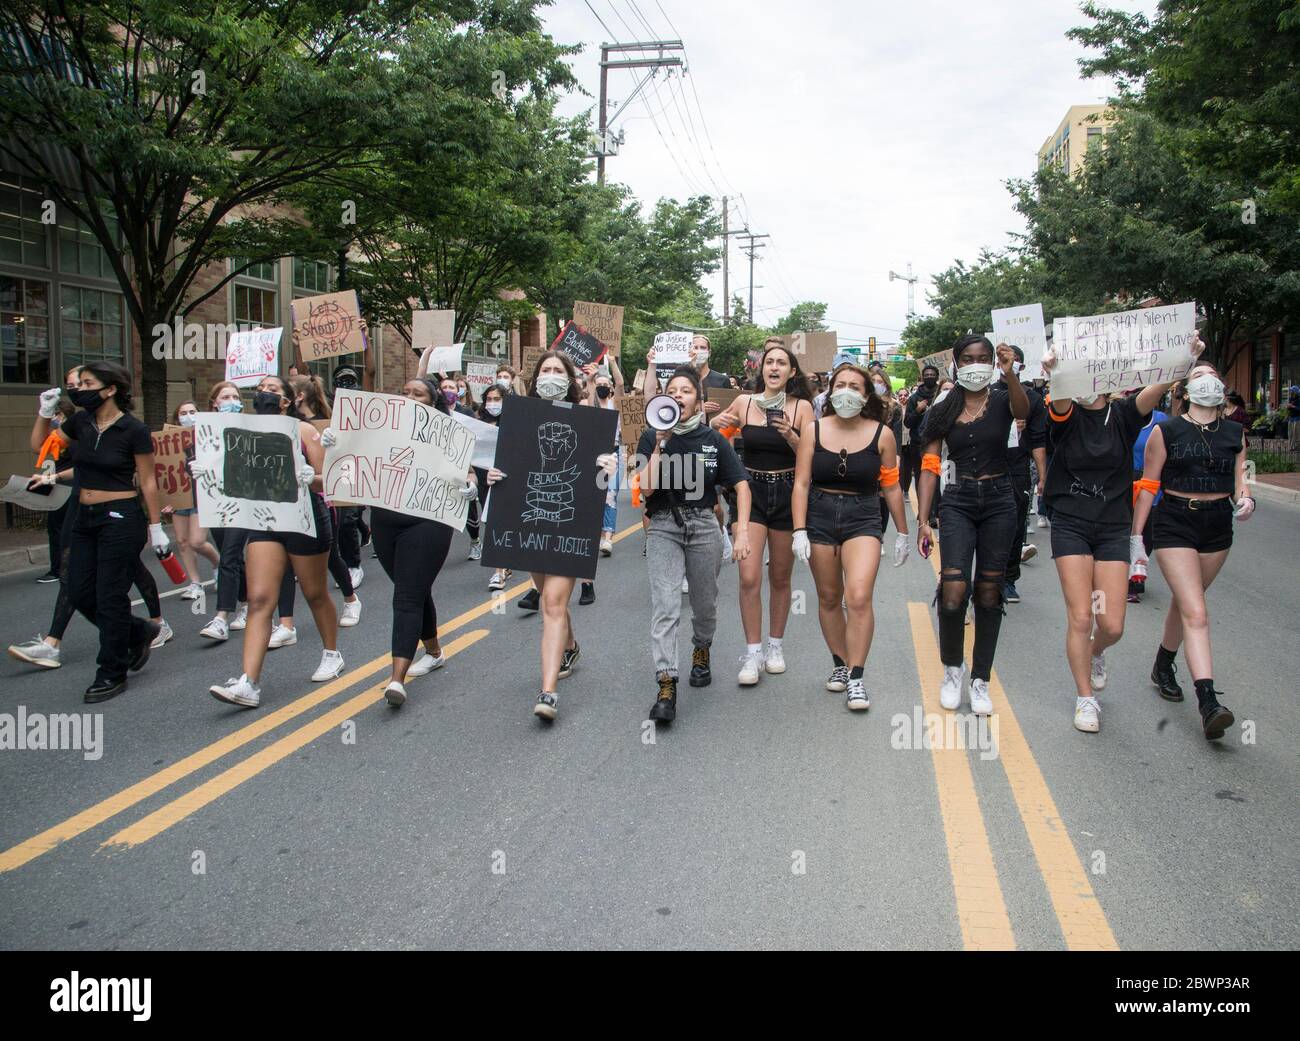 Bethesda, MD, June 2: A rally organized by high school students brought thousands of protestors gather in Bethesda, Maryland, a suburb near Washington DC to voice their concerns about police brutality and systemic racism after the death of George Floyd in Minnesota by a Minneapolis police officer. June 2, 2020. Credit: Patsy Lynch/MediaPunch Stock Photo